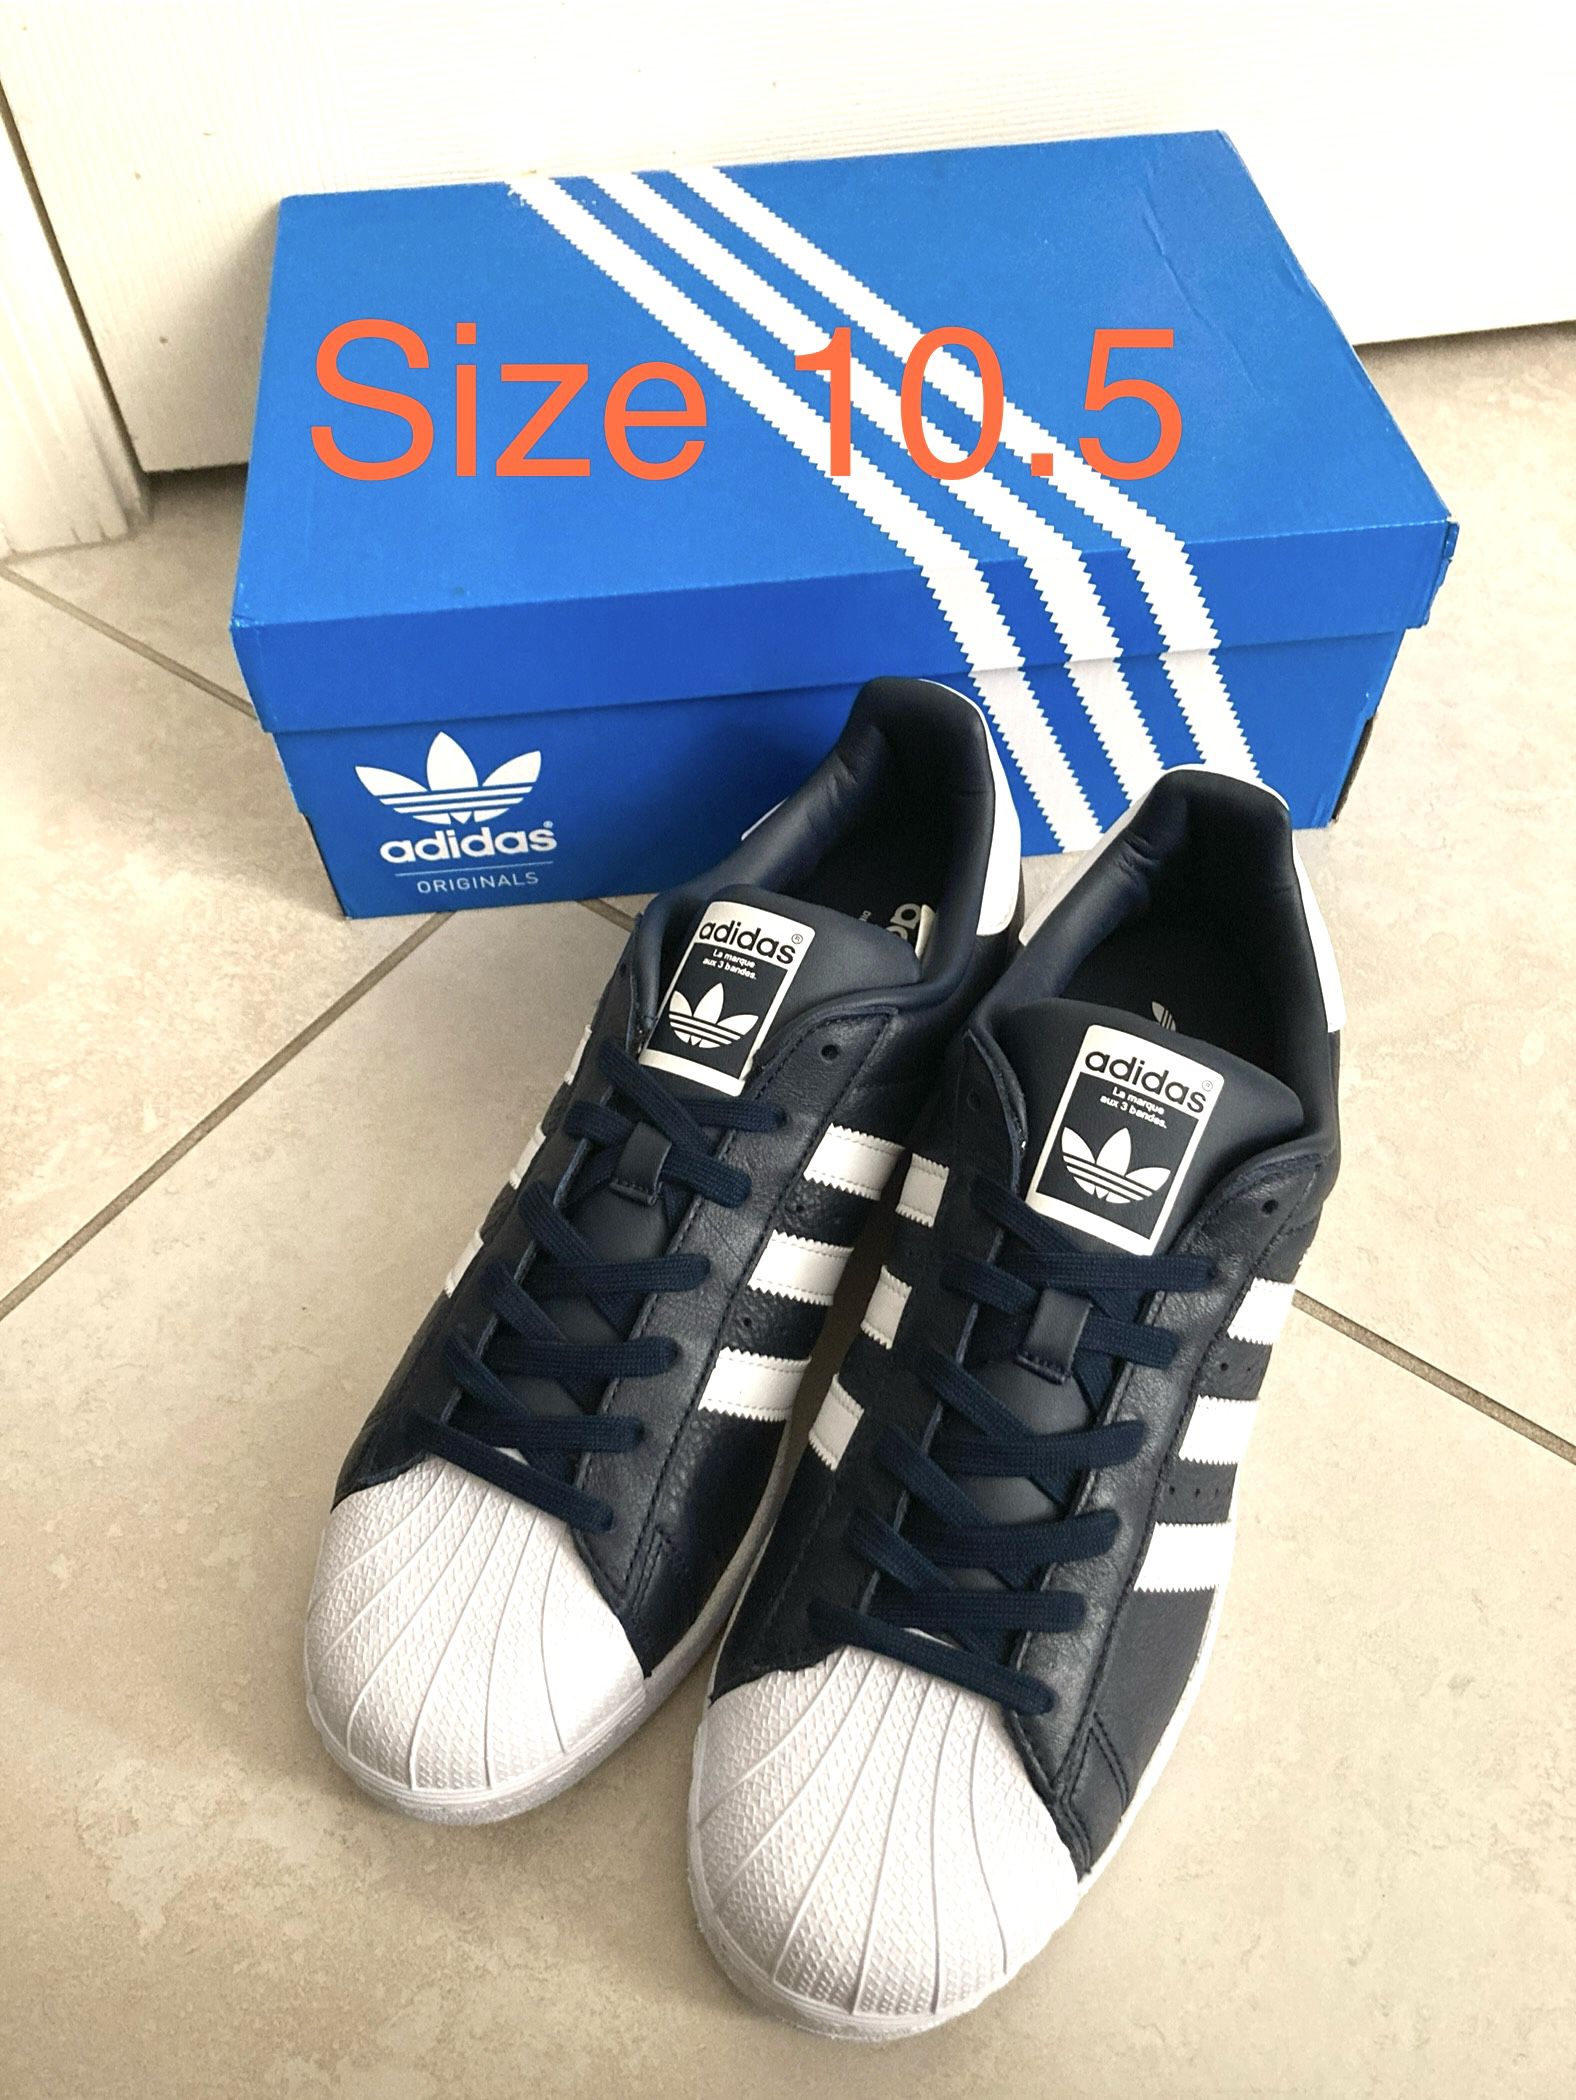 Brand New In Box men’s Adidas shoes superstar size 10.5